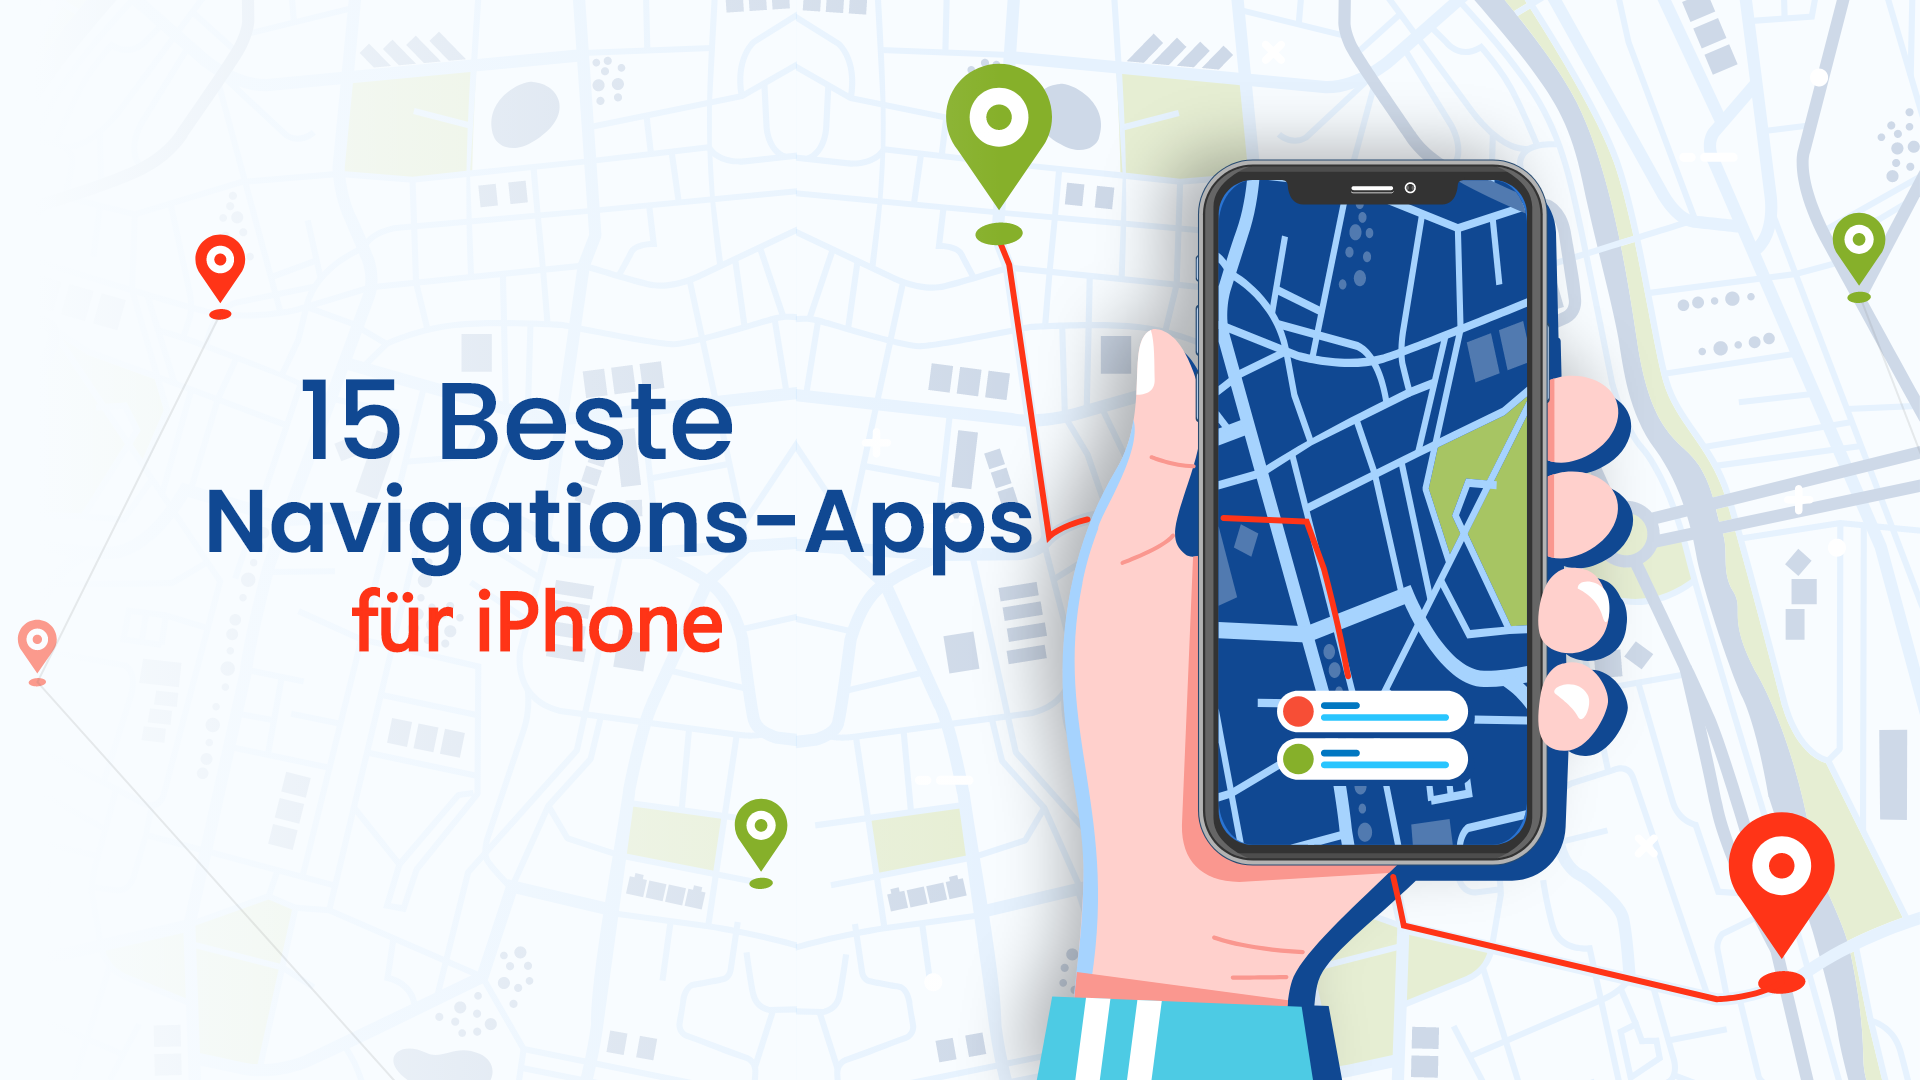 15 best navigation apps for iPhone